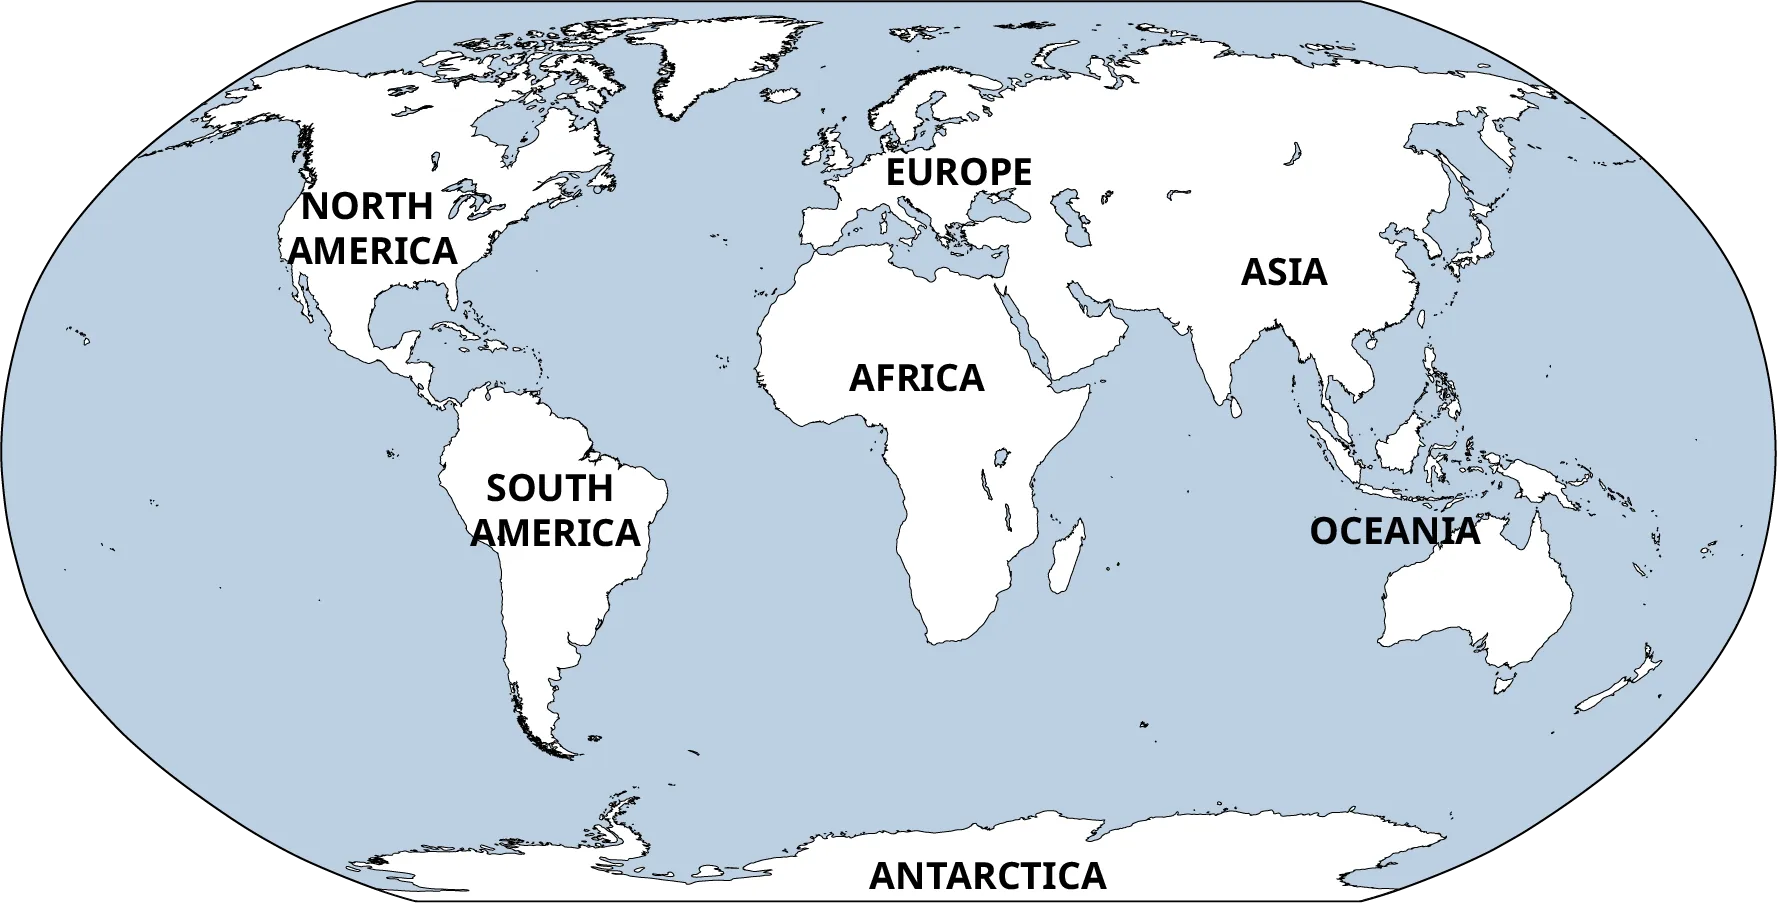 A map of the world continents. The continents are North America, South America, Europe, Asia, Africa, Oceania, and Antarctica.